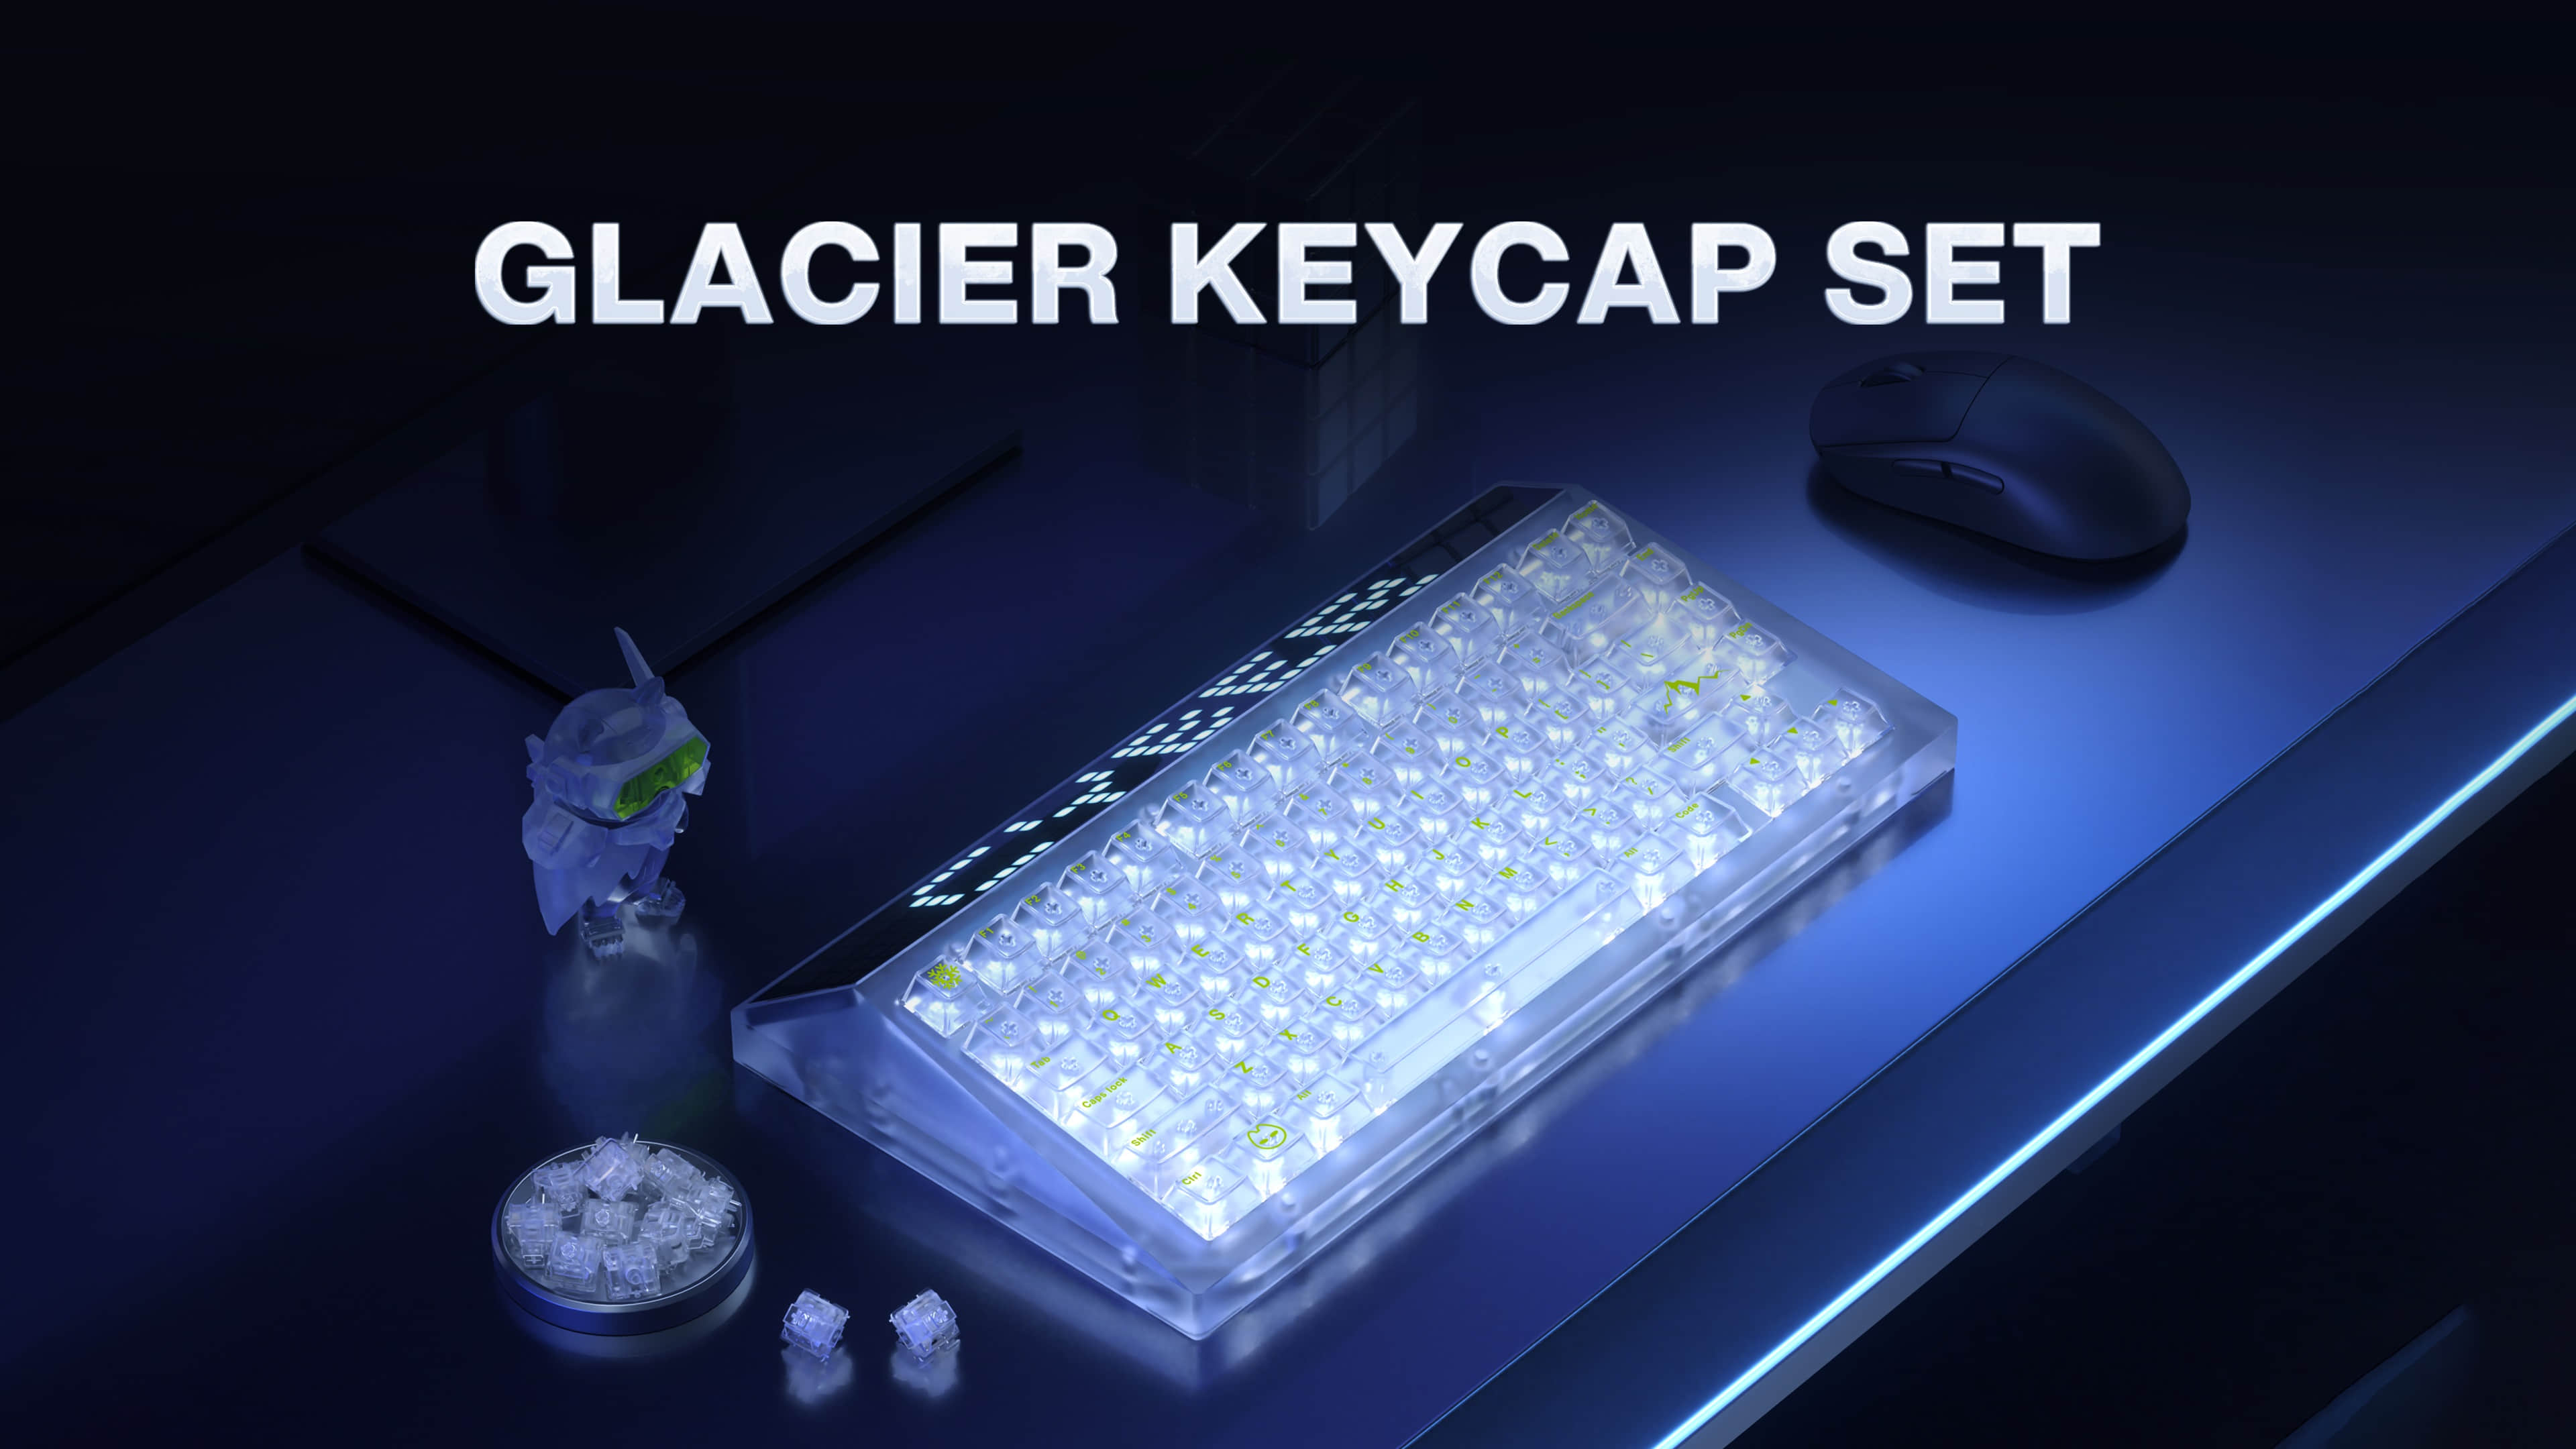 In Stock) Angry Miao Glacier Keycaps – proto[Typist] Keyboards